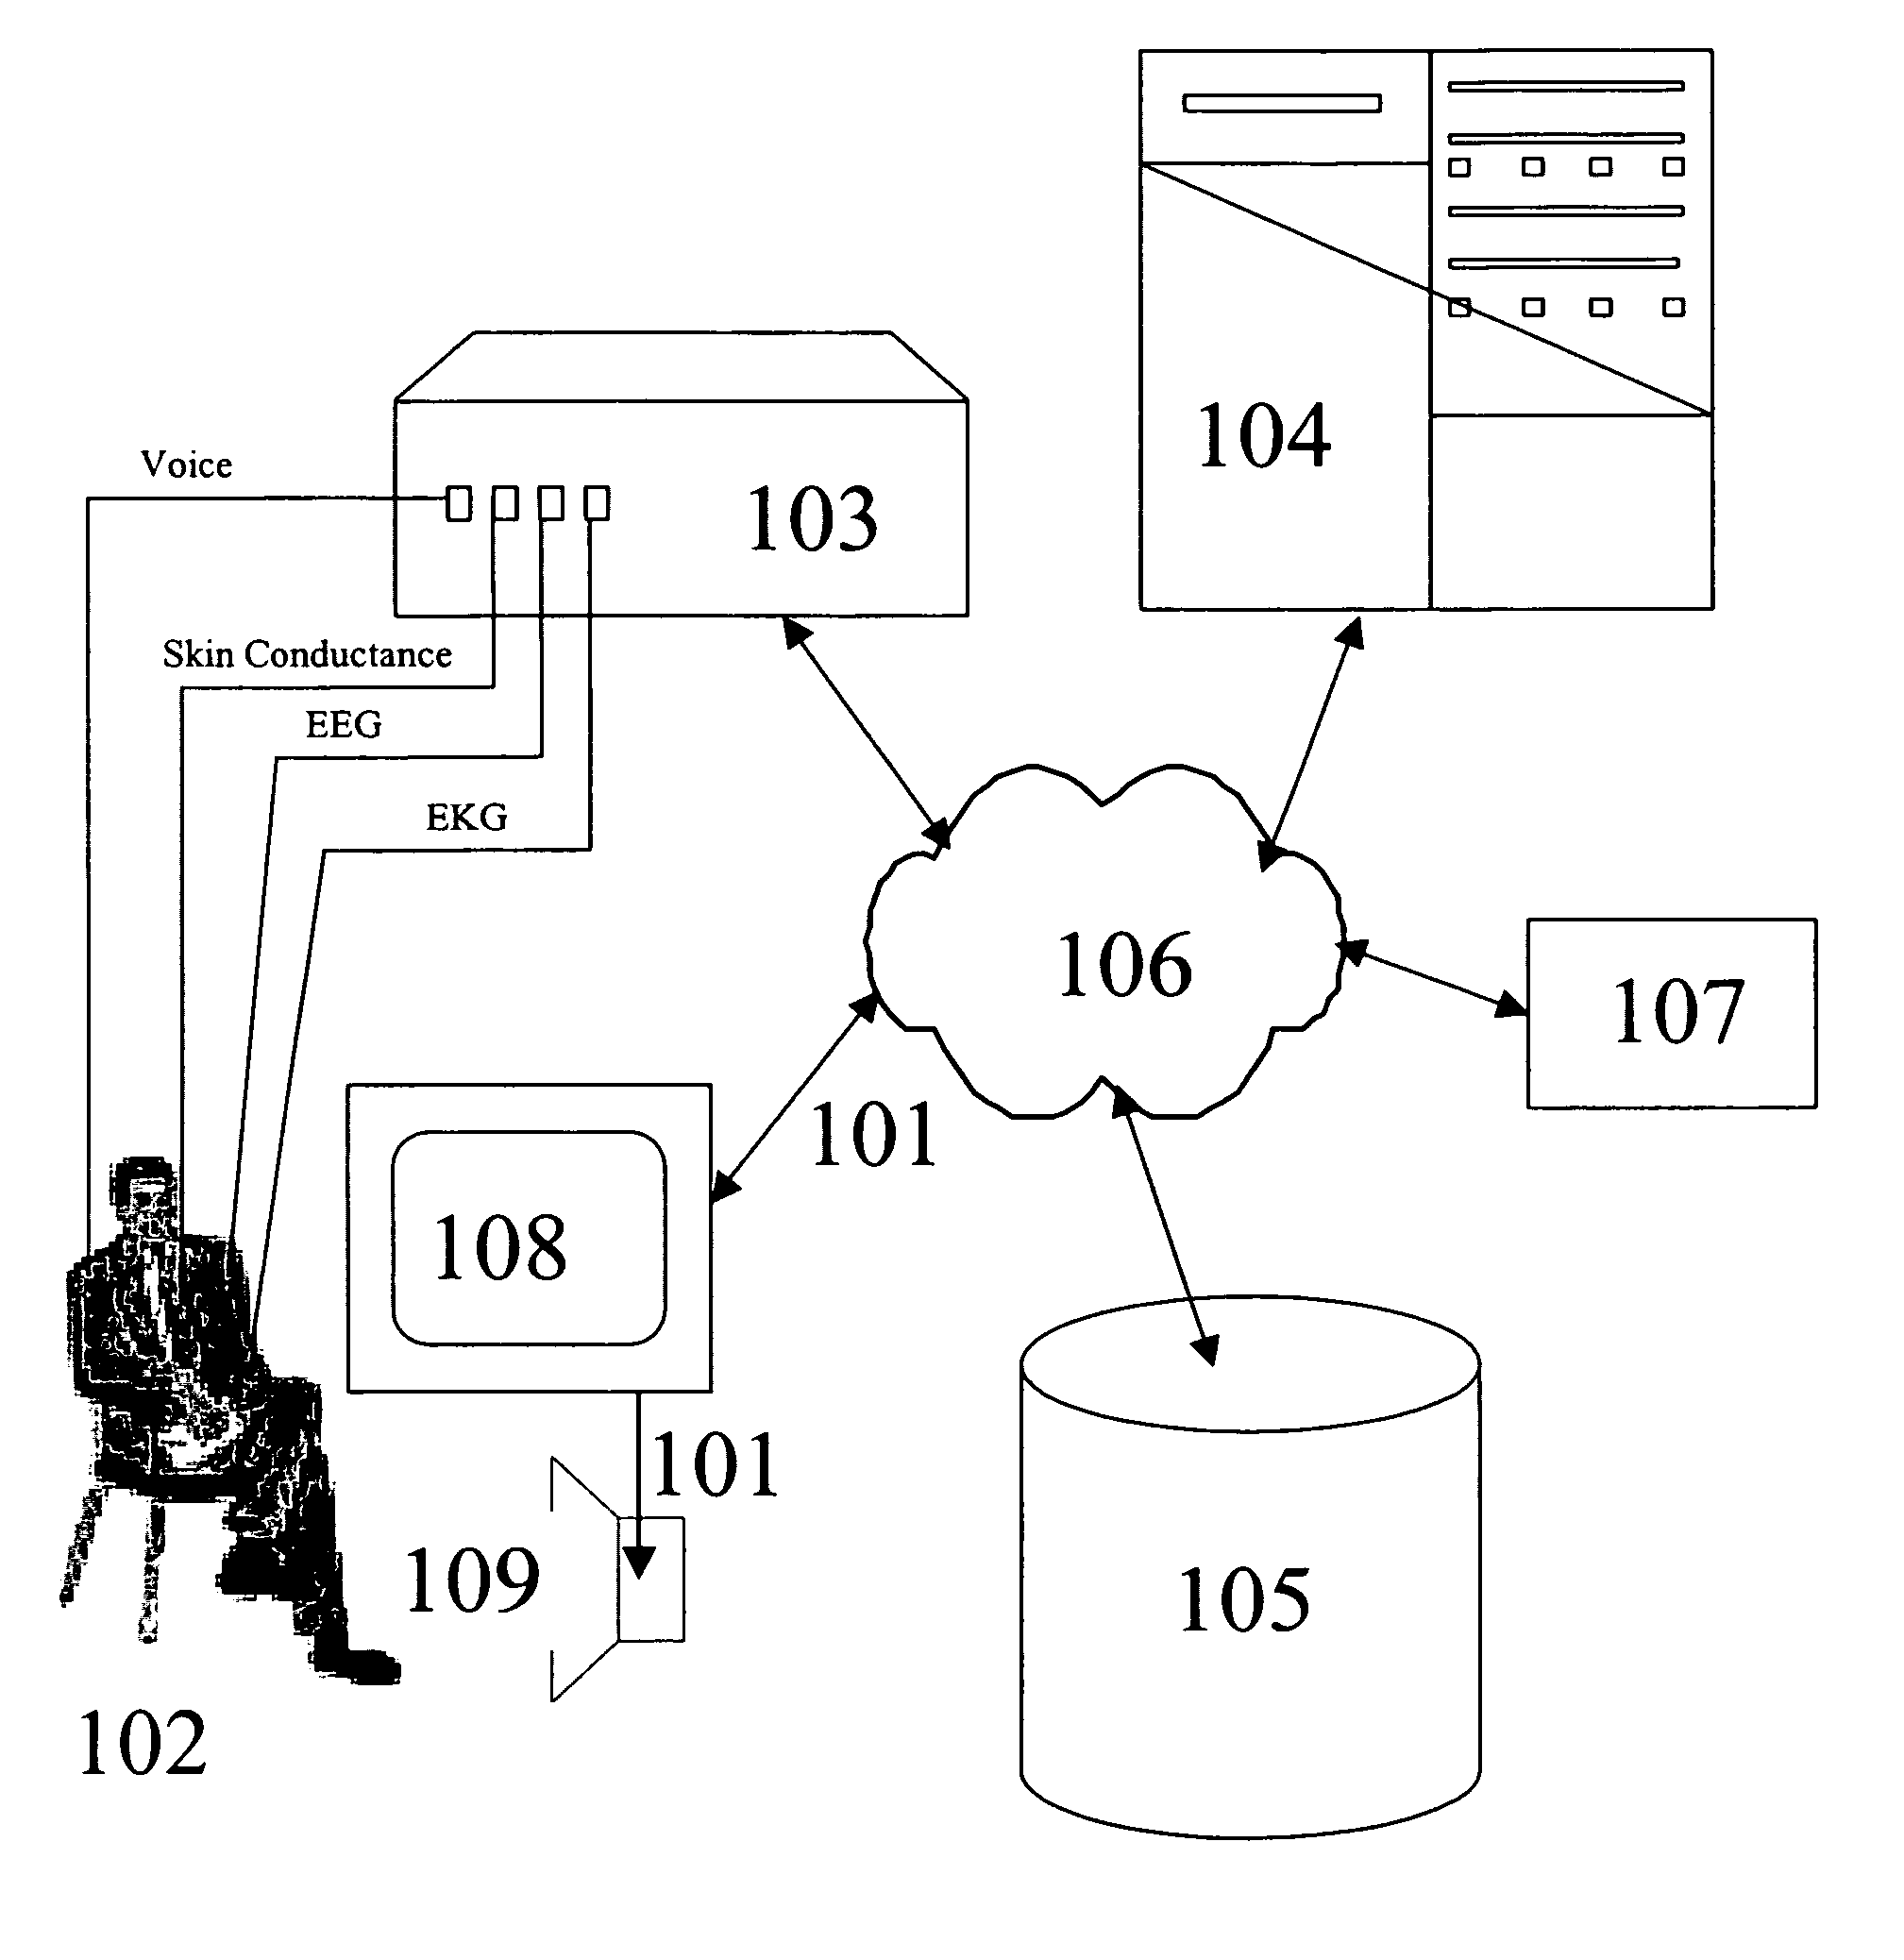 Method for using psychological states to index databases